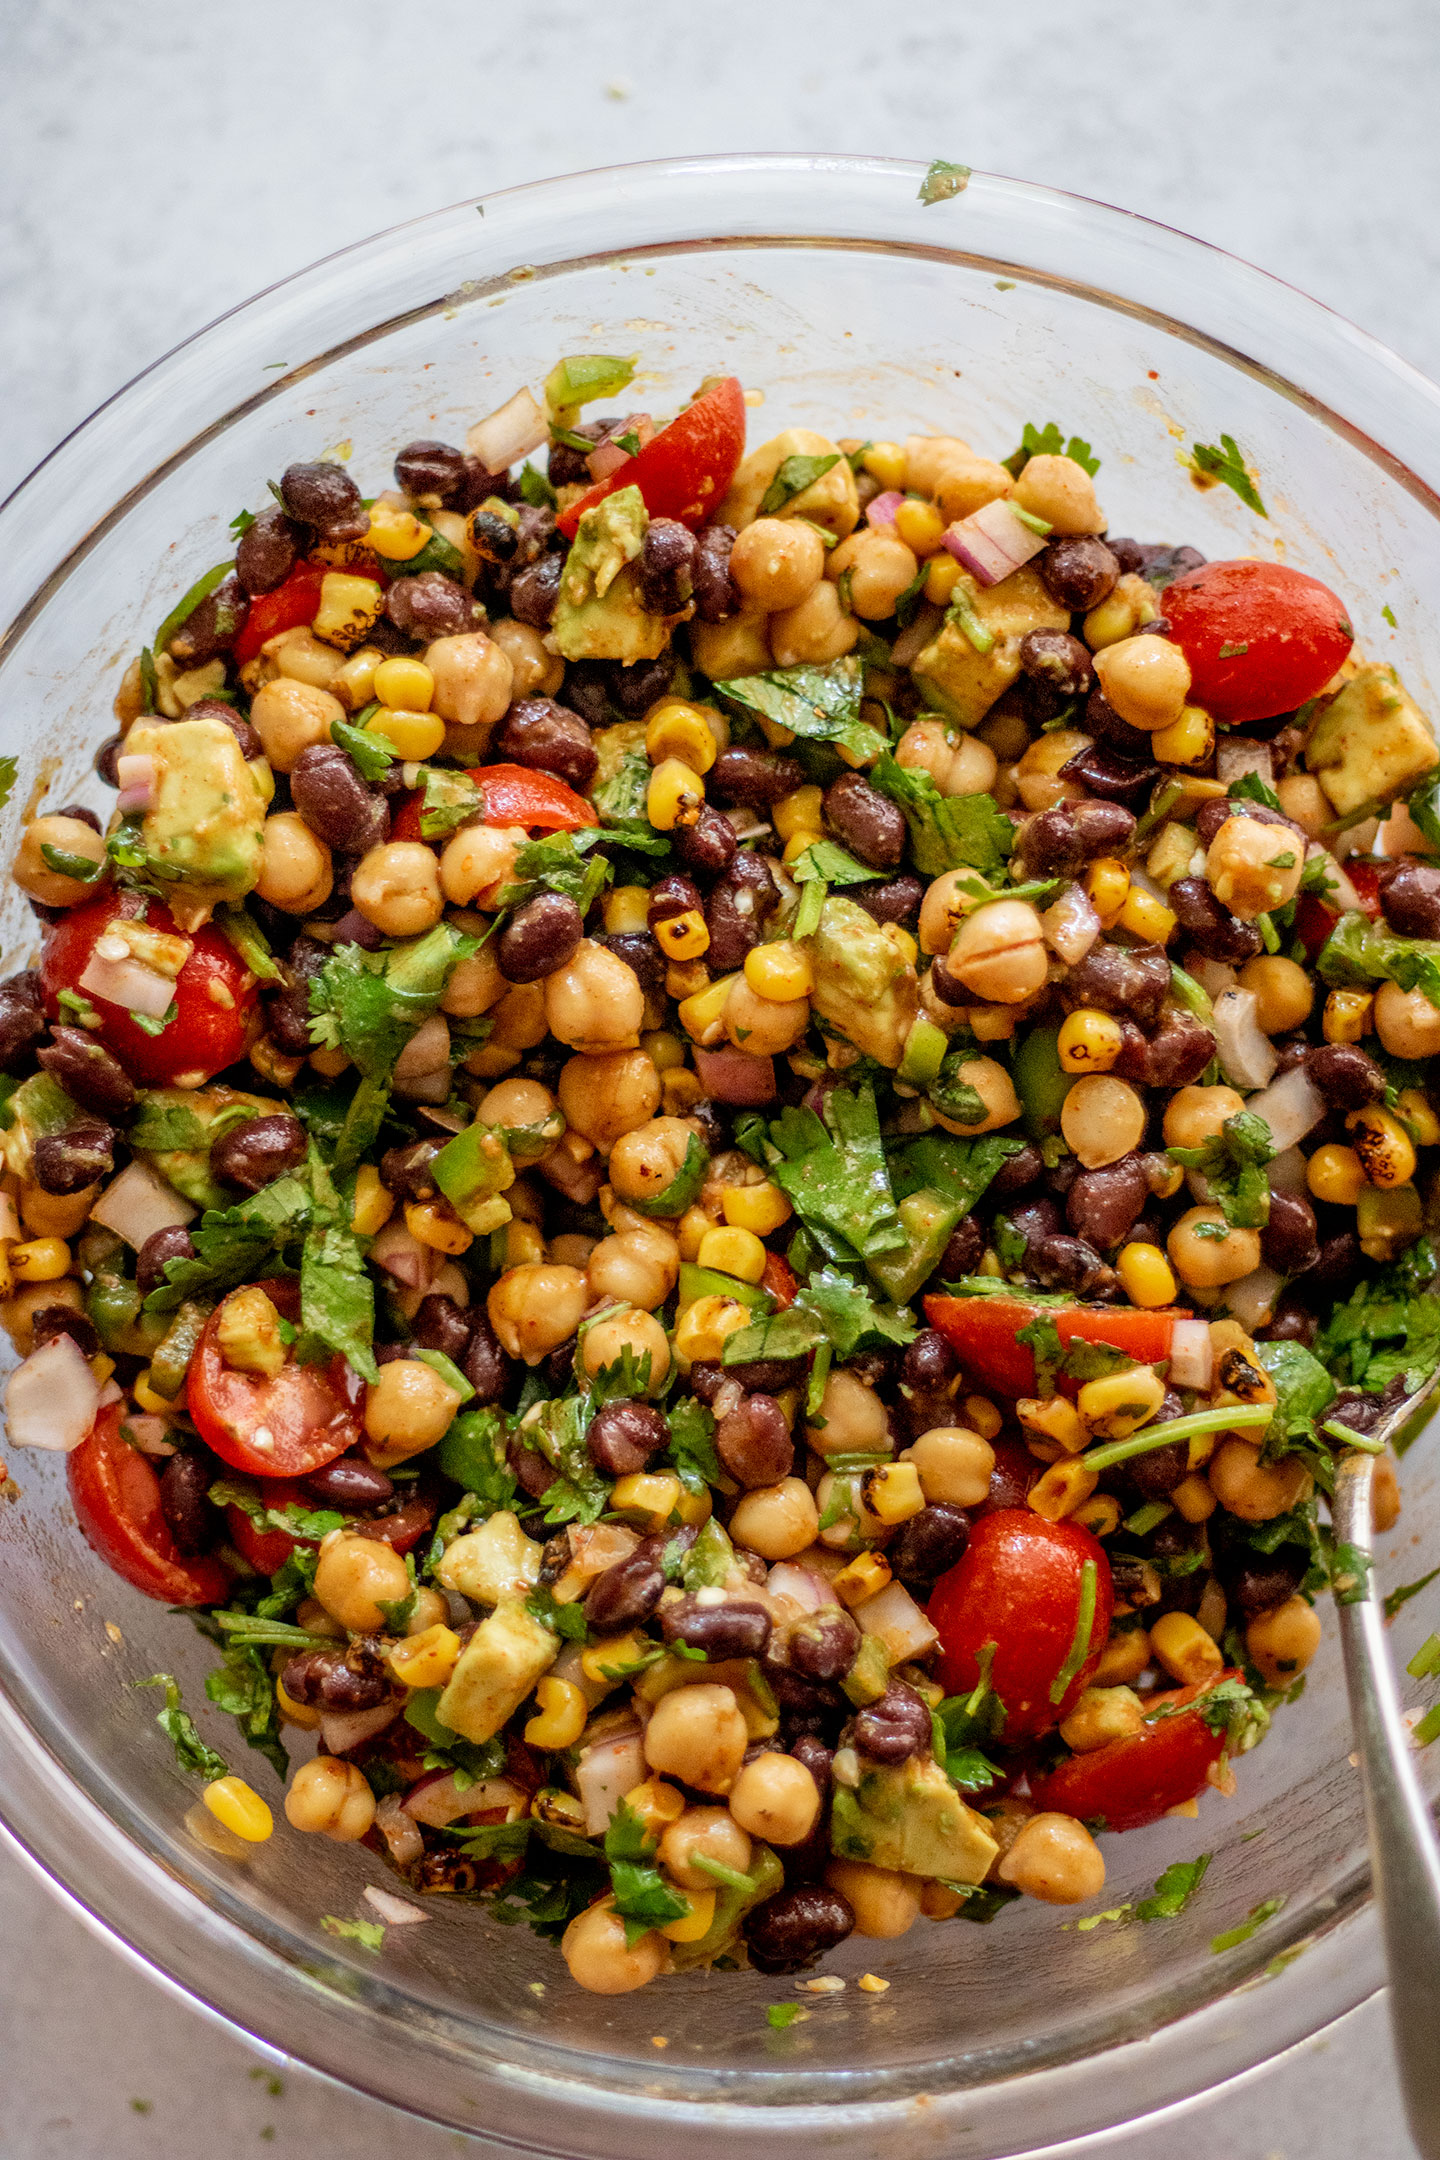 Combining the bean and corn salad with the chili lime vinaigrette in a large mixing bowl.